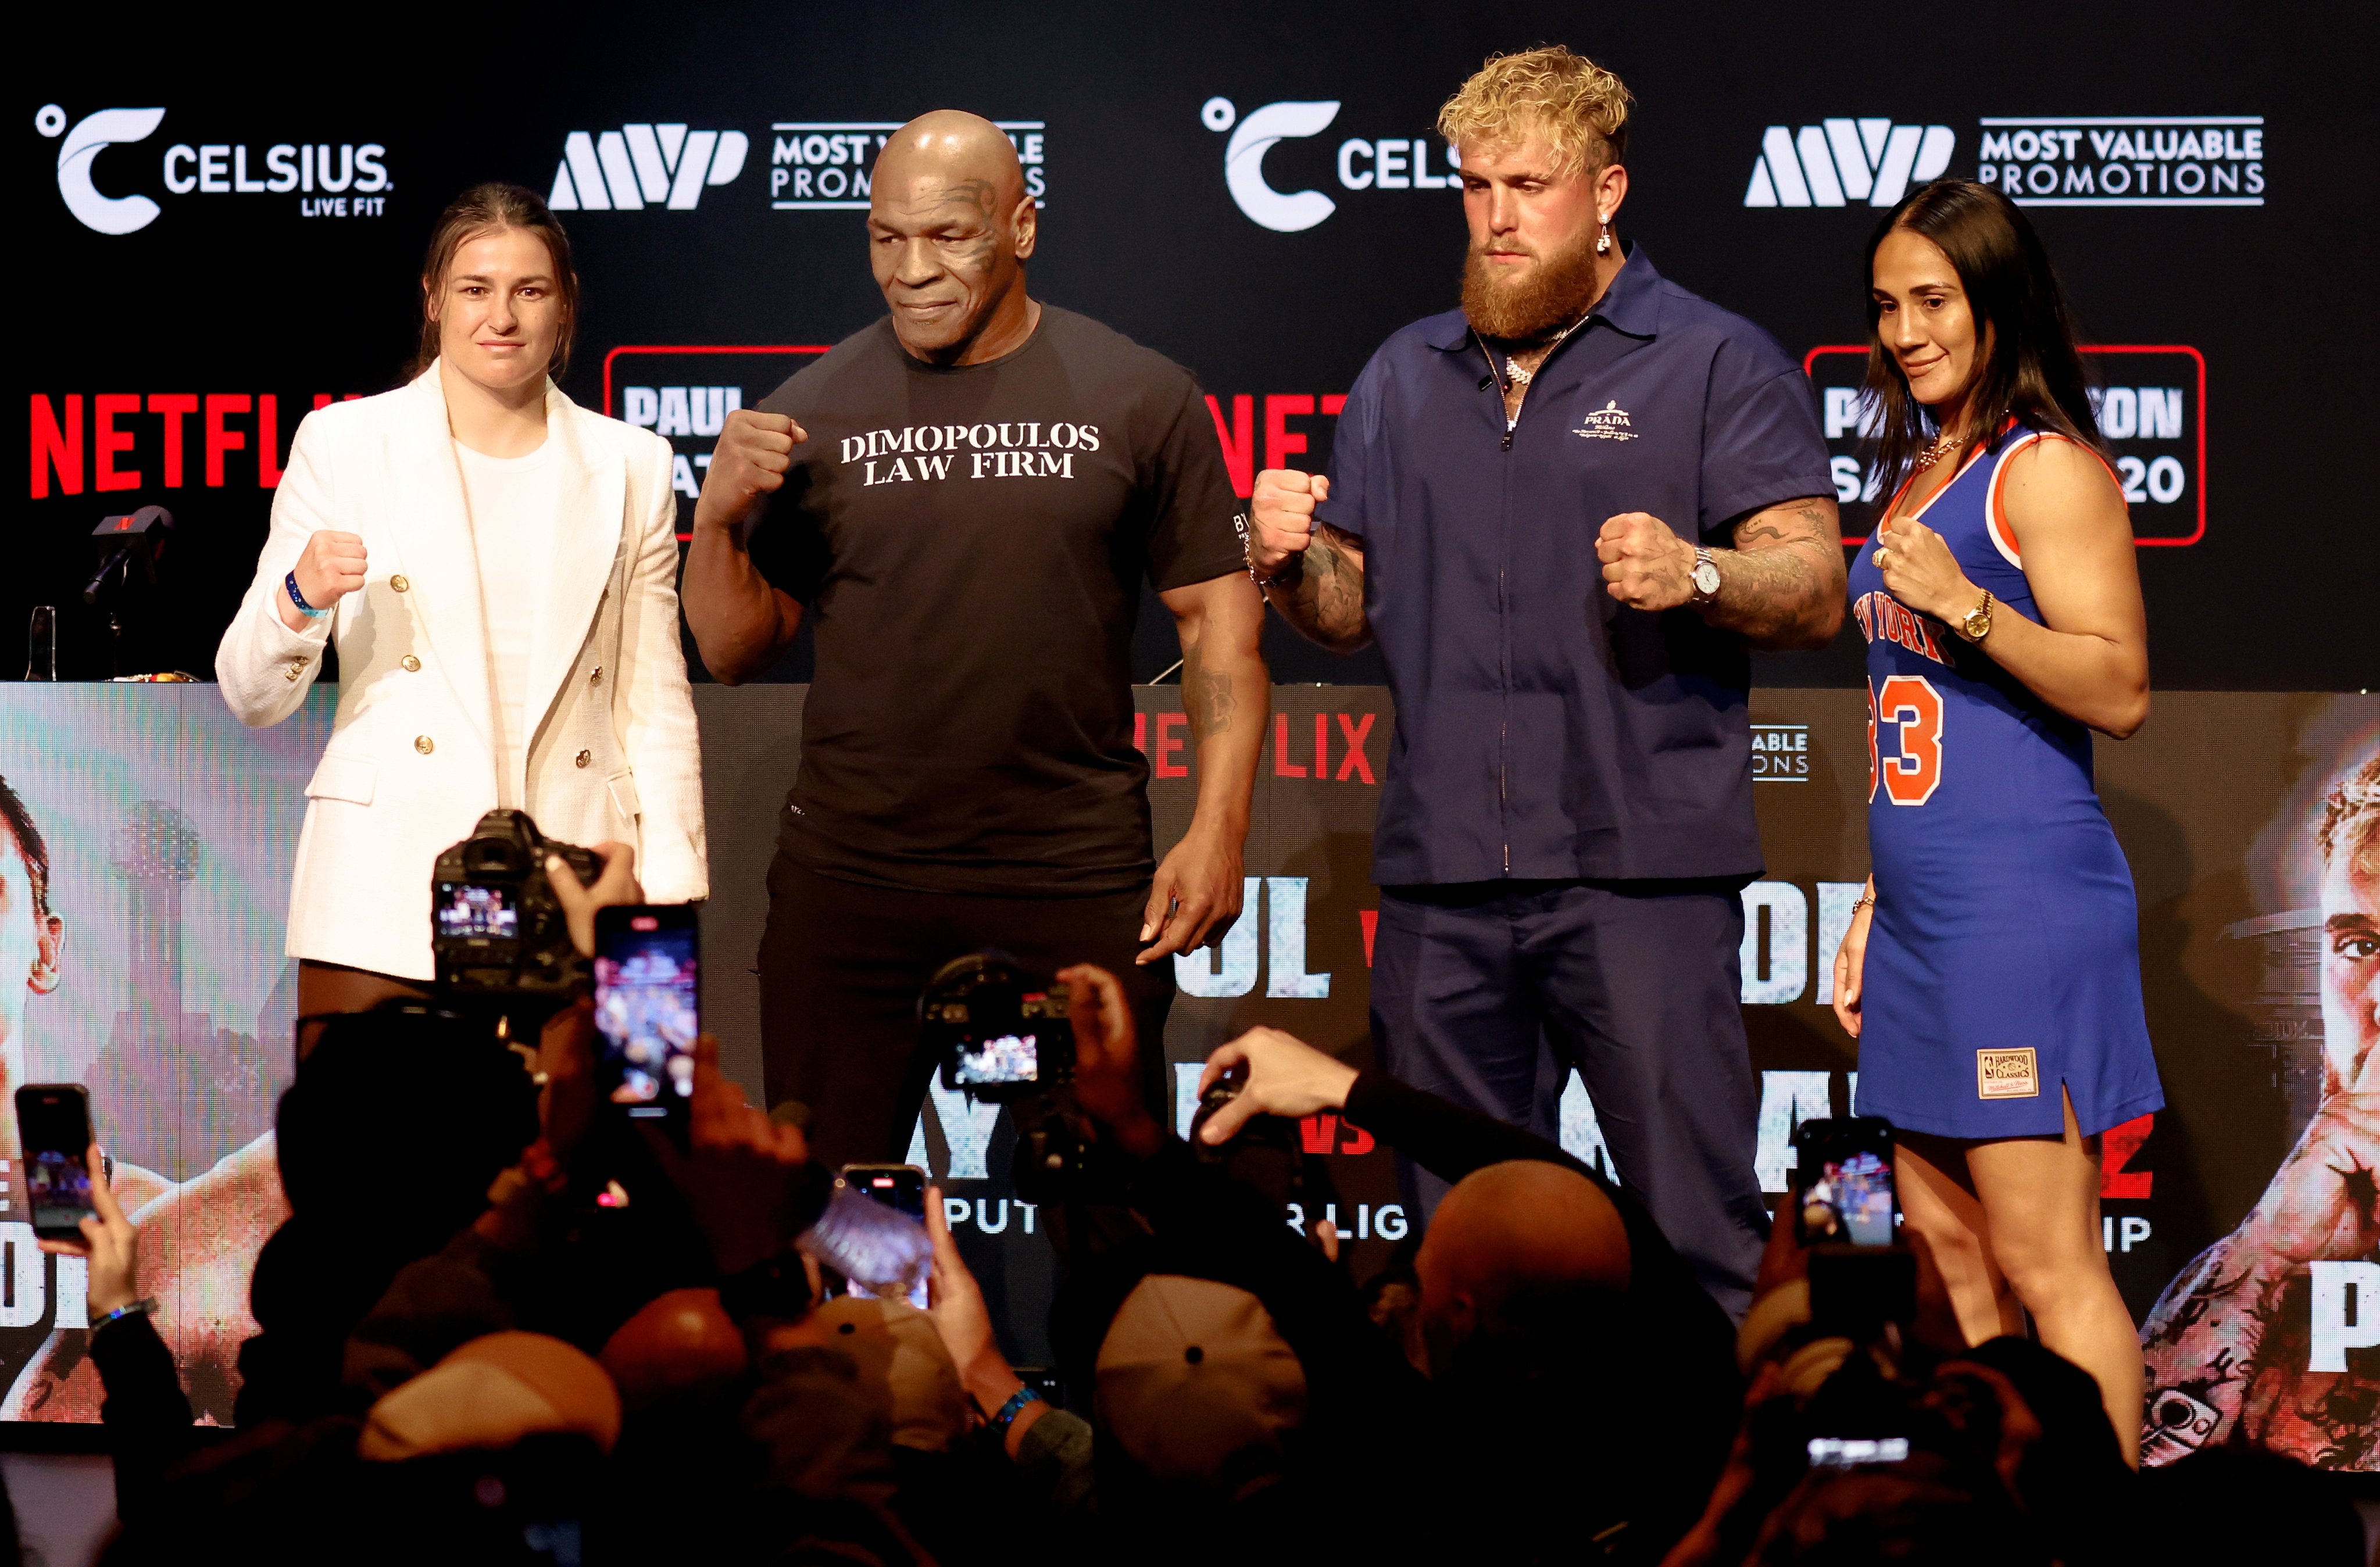 Former heavyweight champion Mike Tyson, and YouTuber and pro boxer Jake Paul at a press conference to promote their fight in Texas on 20 July. Photo: EPA-EFE